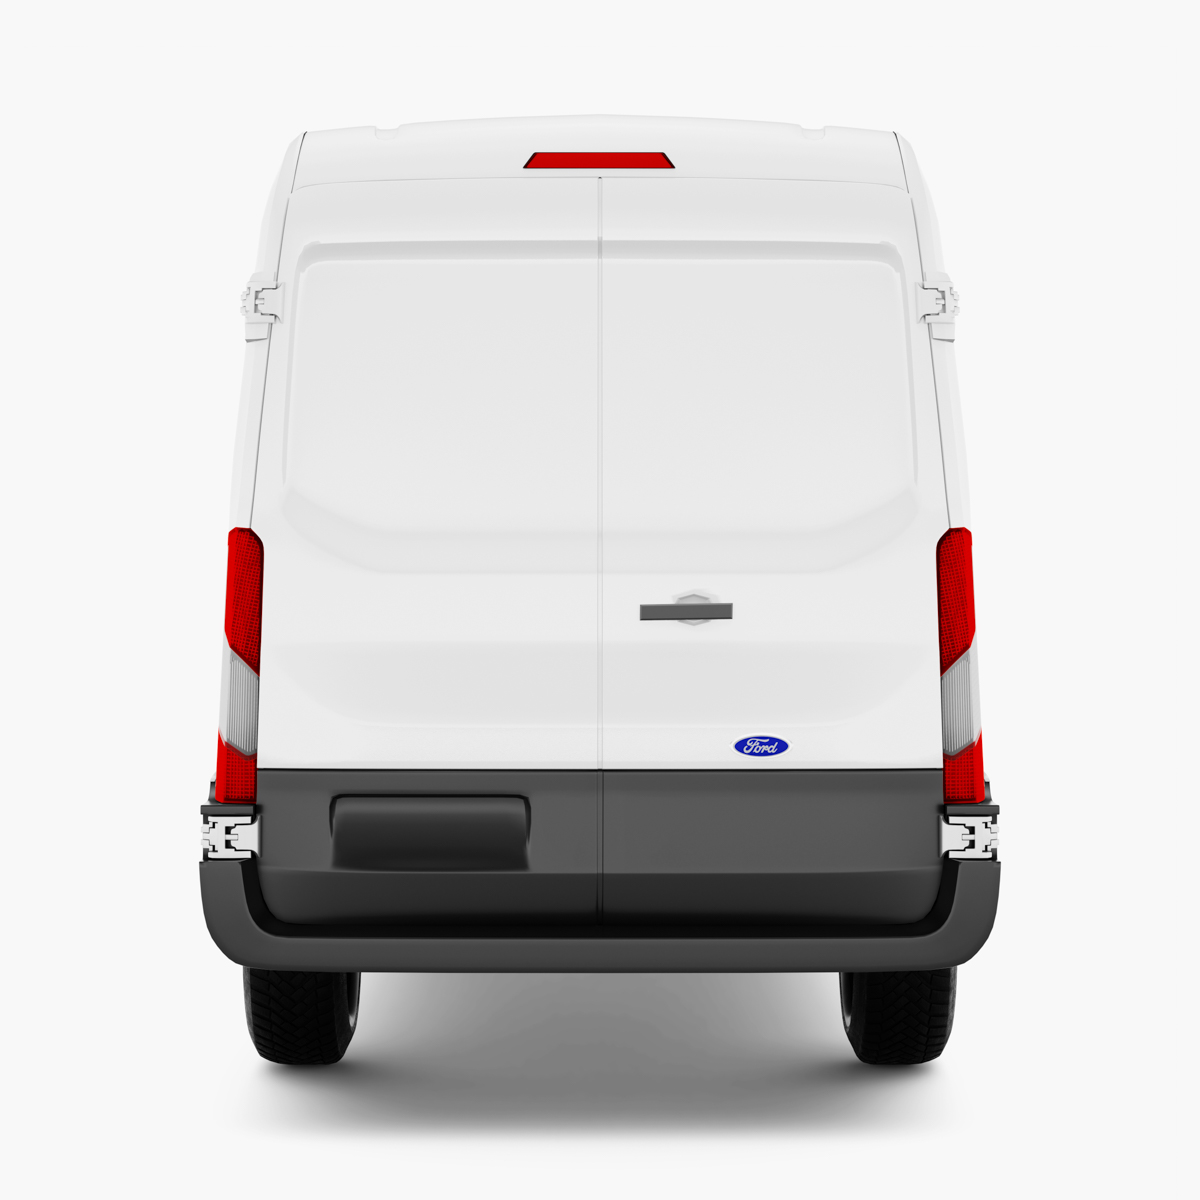 14_Ford Transit Truck Mockup - Back View_Preview3